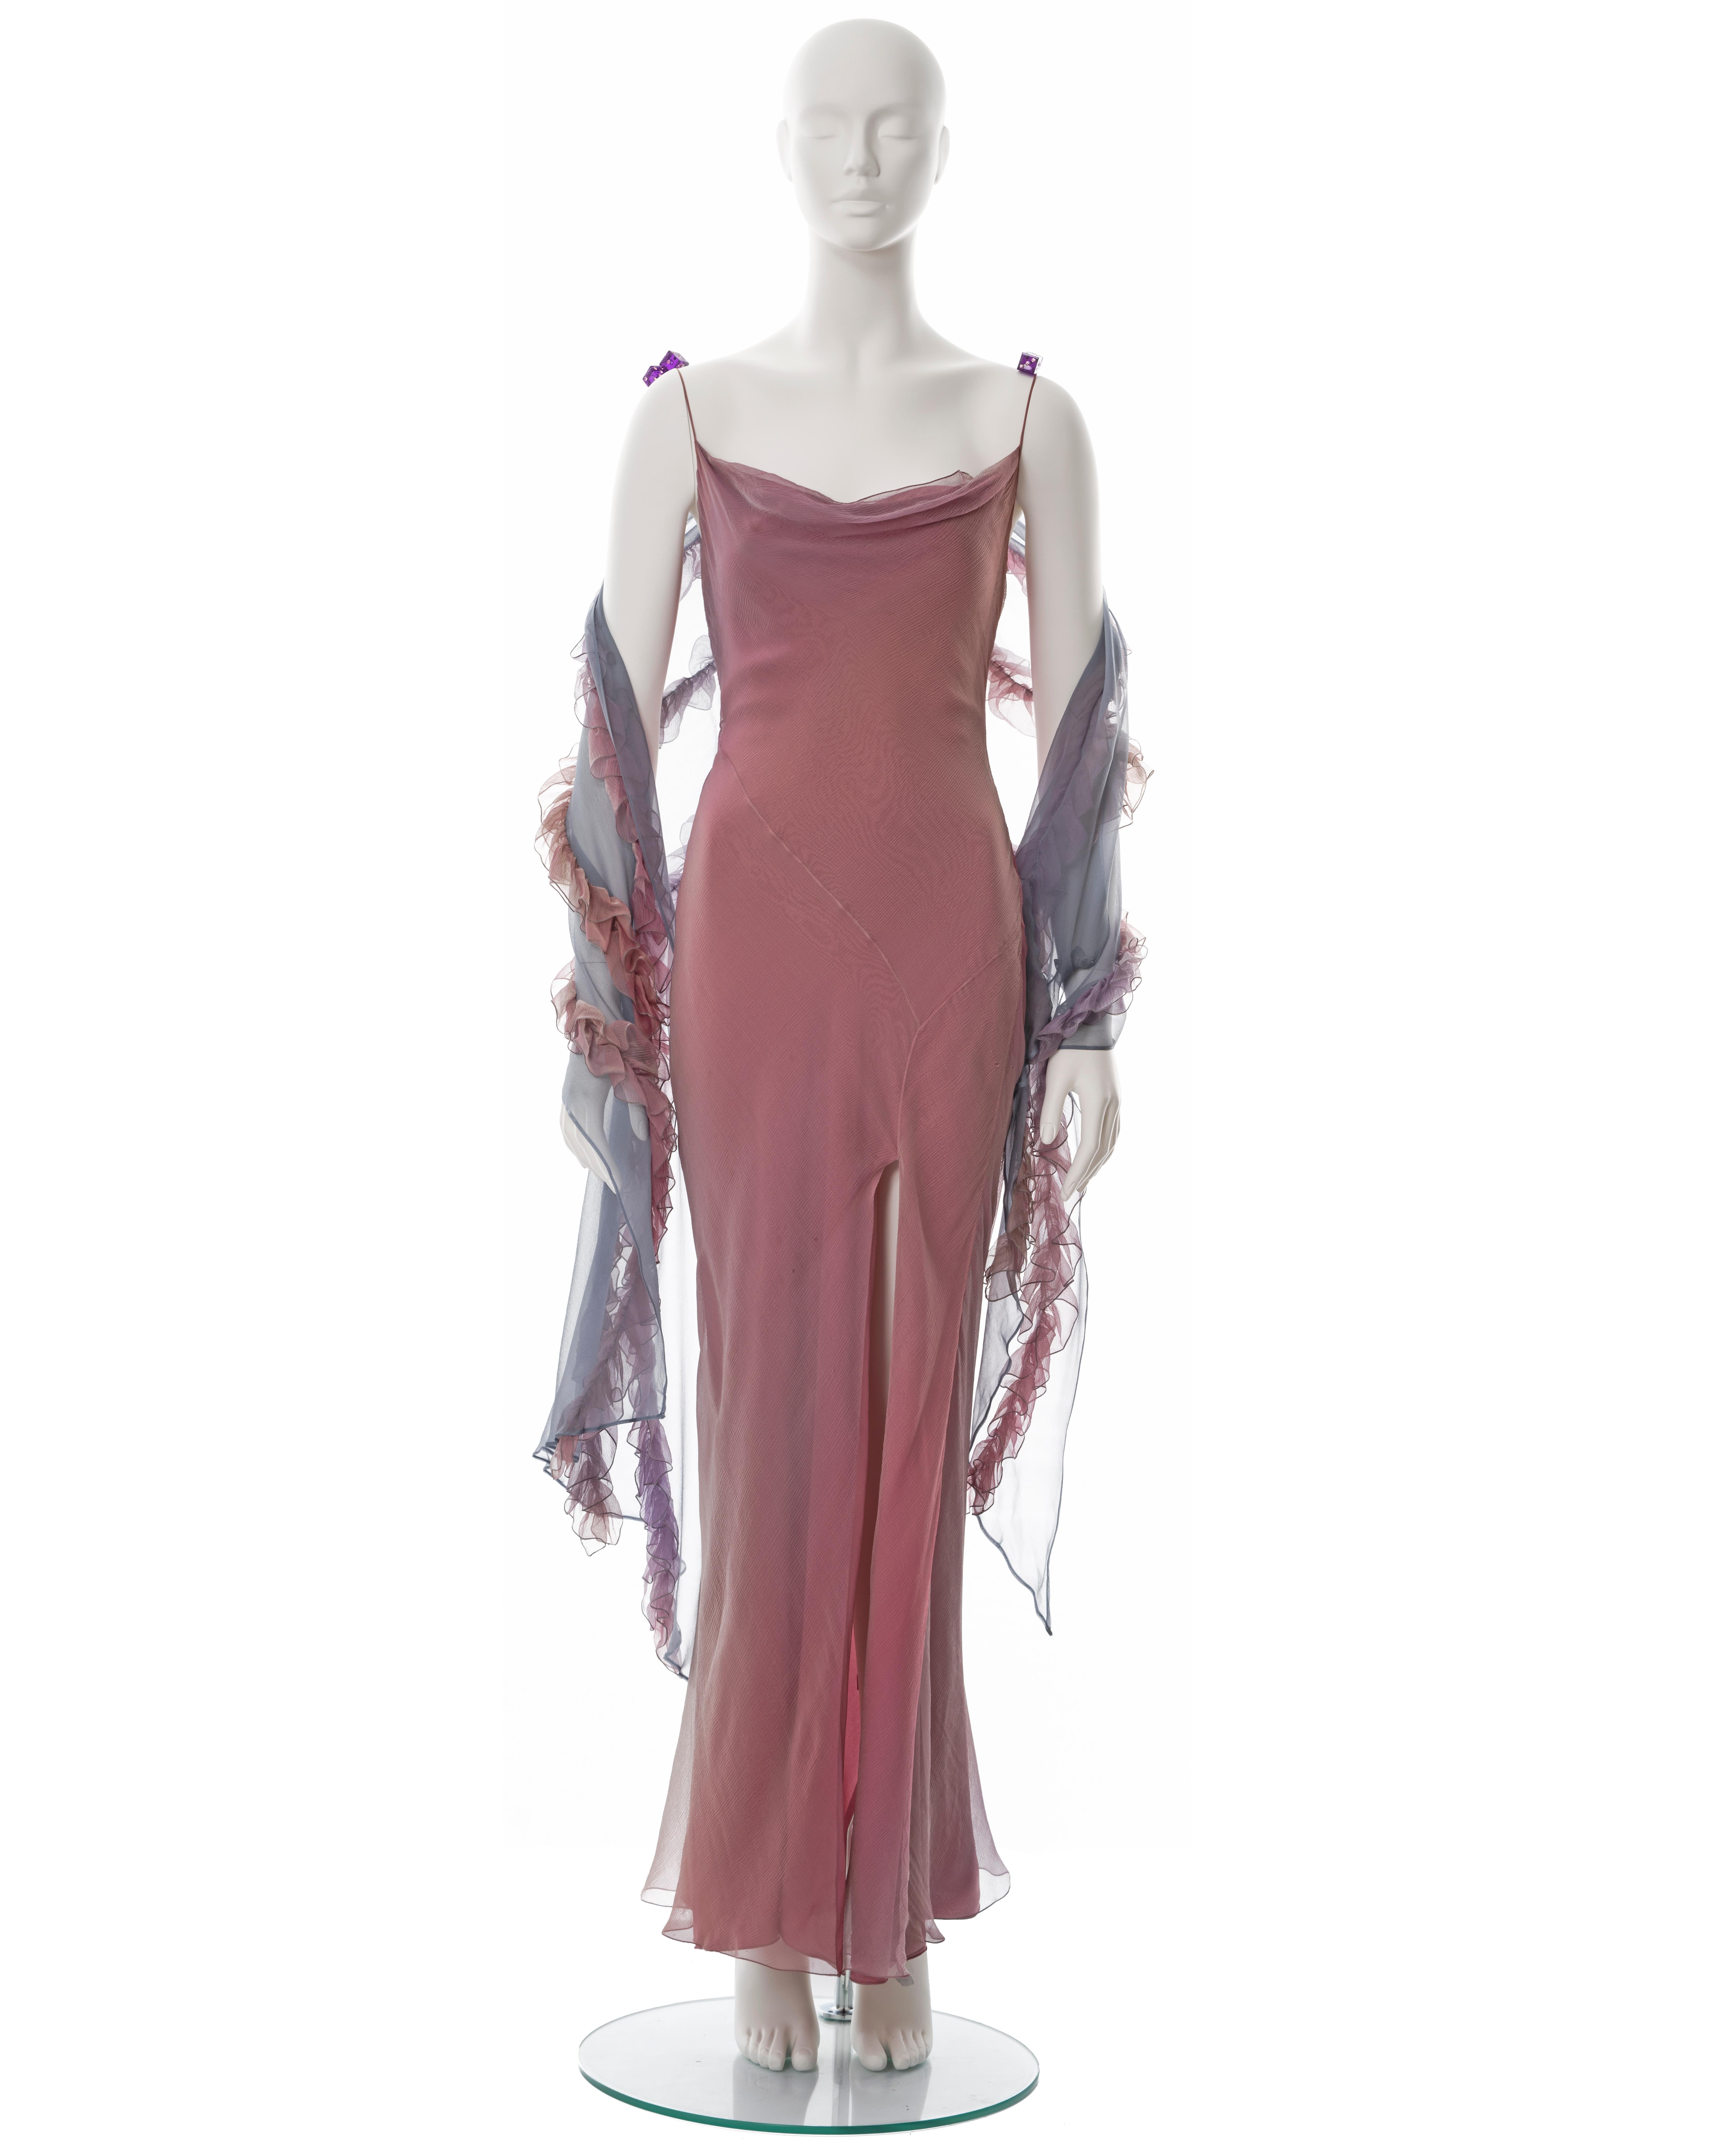 ▪ Christian Dior bias cut silk evening dress with shawl
▪ Designed by John Galliano
▪ Sold by One of a Kind Archive
▪ Fall-Winter 2004
▪ Crinkled silk chiffon in a pink and purple ombre 
▪ Double-layered
▪ Cowl neck 
▪ High leg slit 
▪ Purple dice